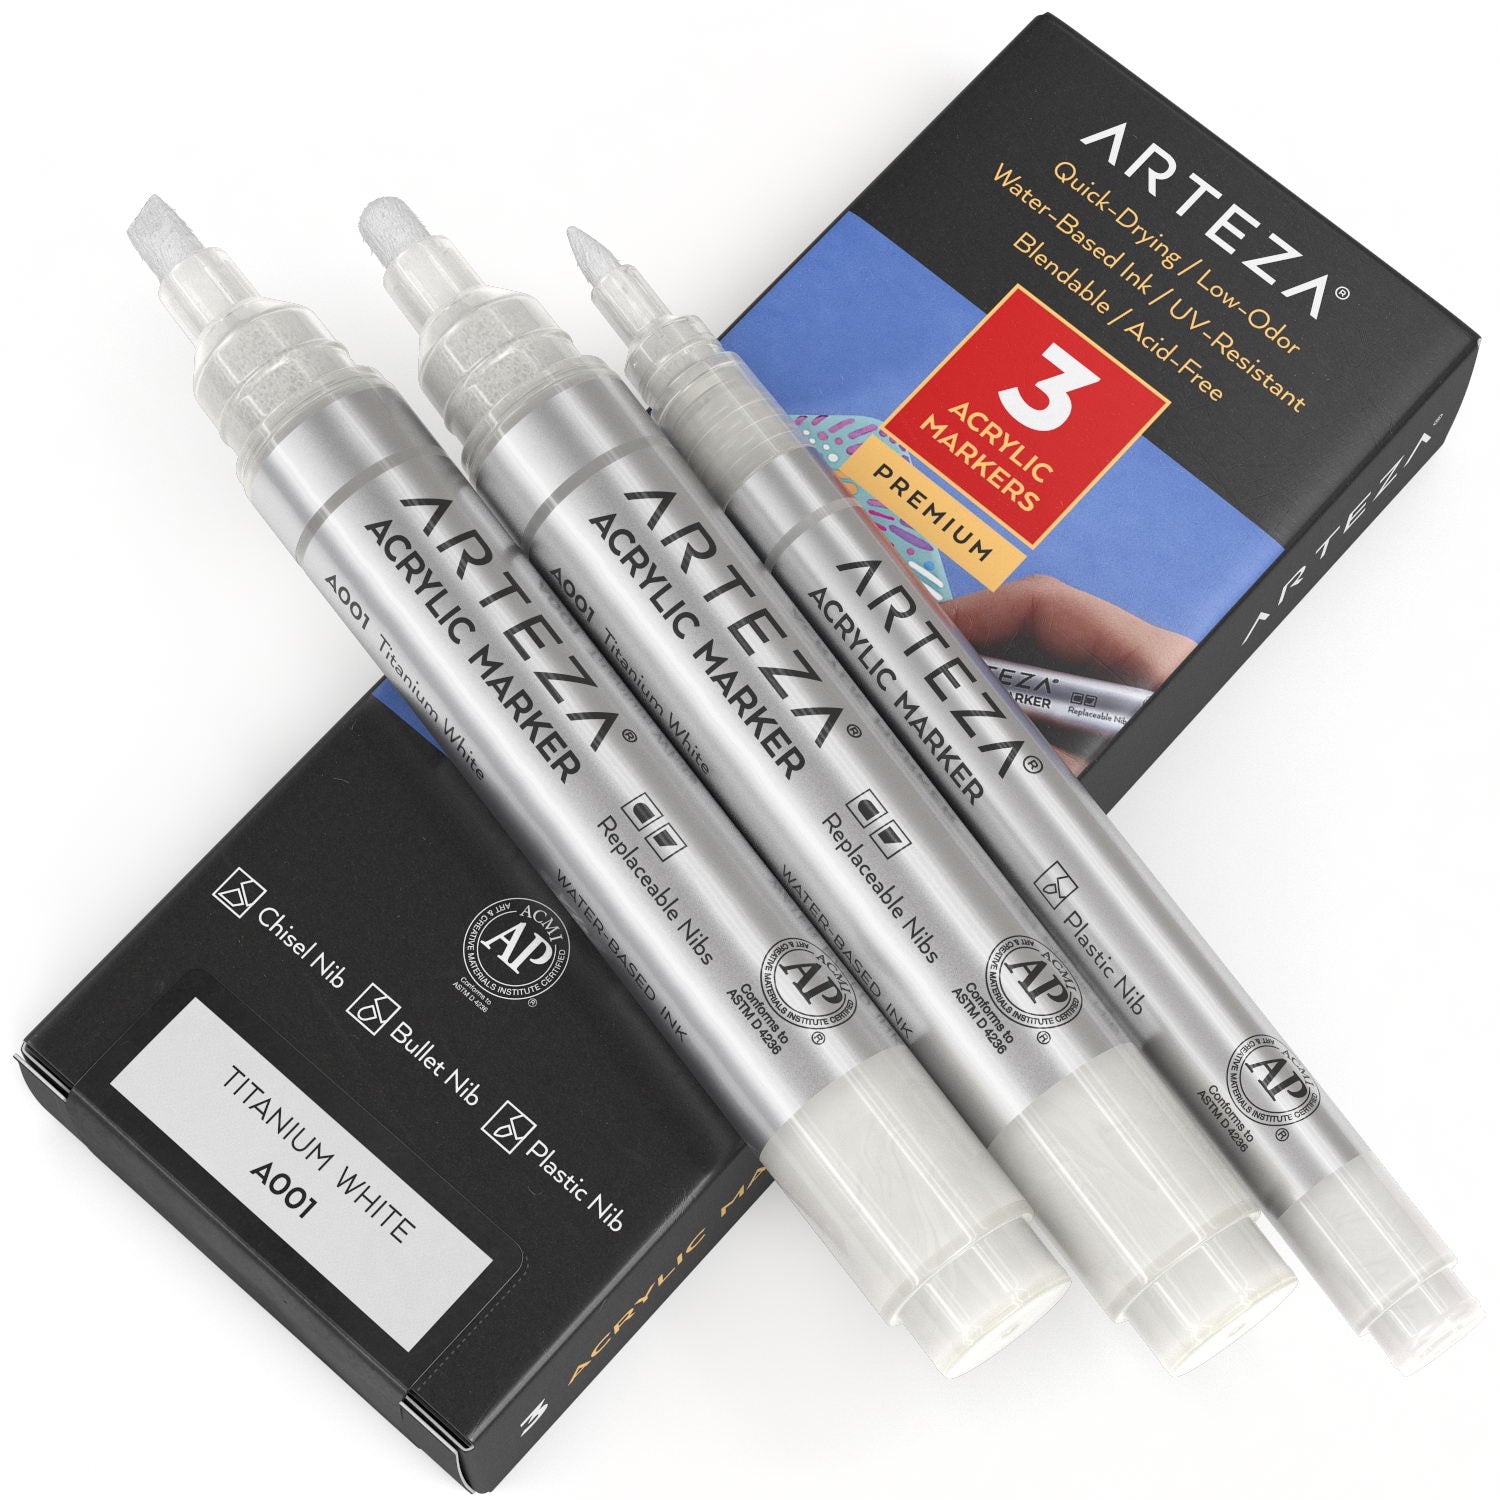  Arteza Acrylic Paint Markers, Set of 40 Acrylic Paint Pens in  Assorted Colors, Art & Craft Supplies for Glass, Pottery, Ceramic, Plastic,  Rock, and Canvas Painting : Arts, Crafts & Sewing